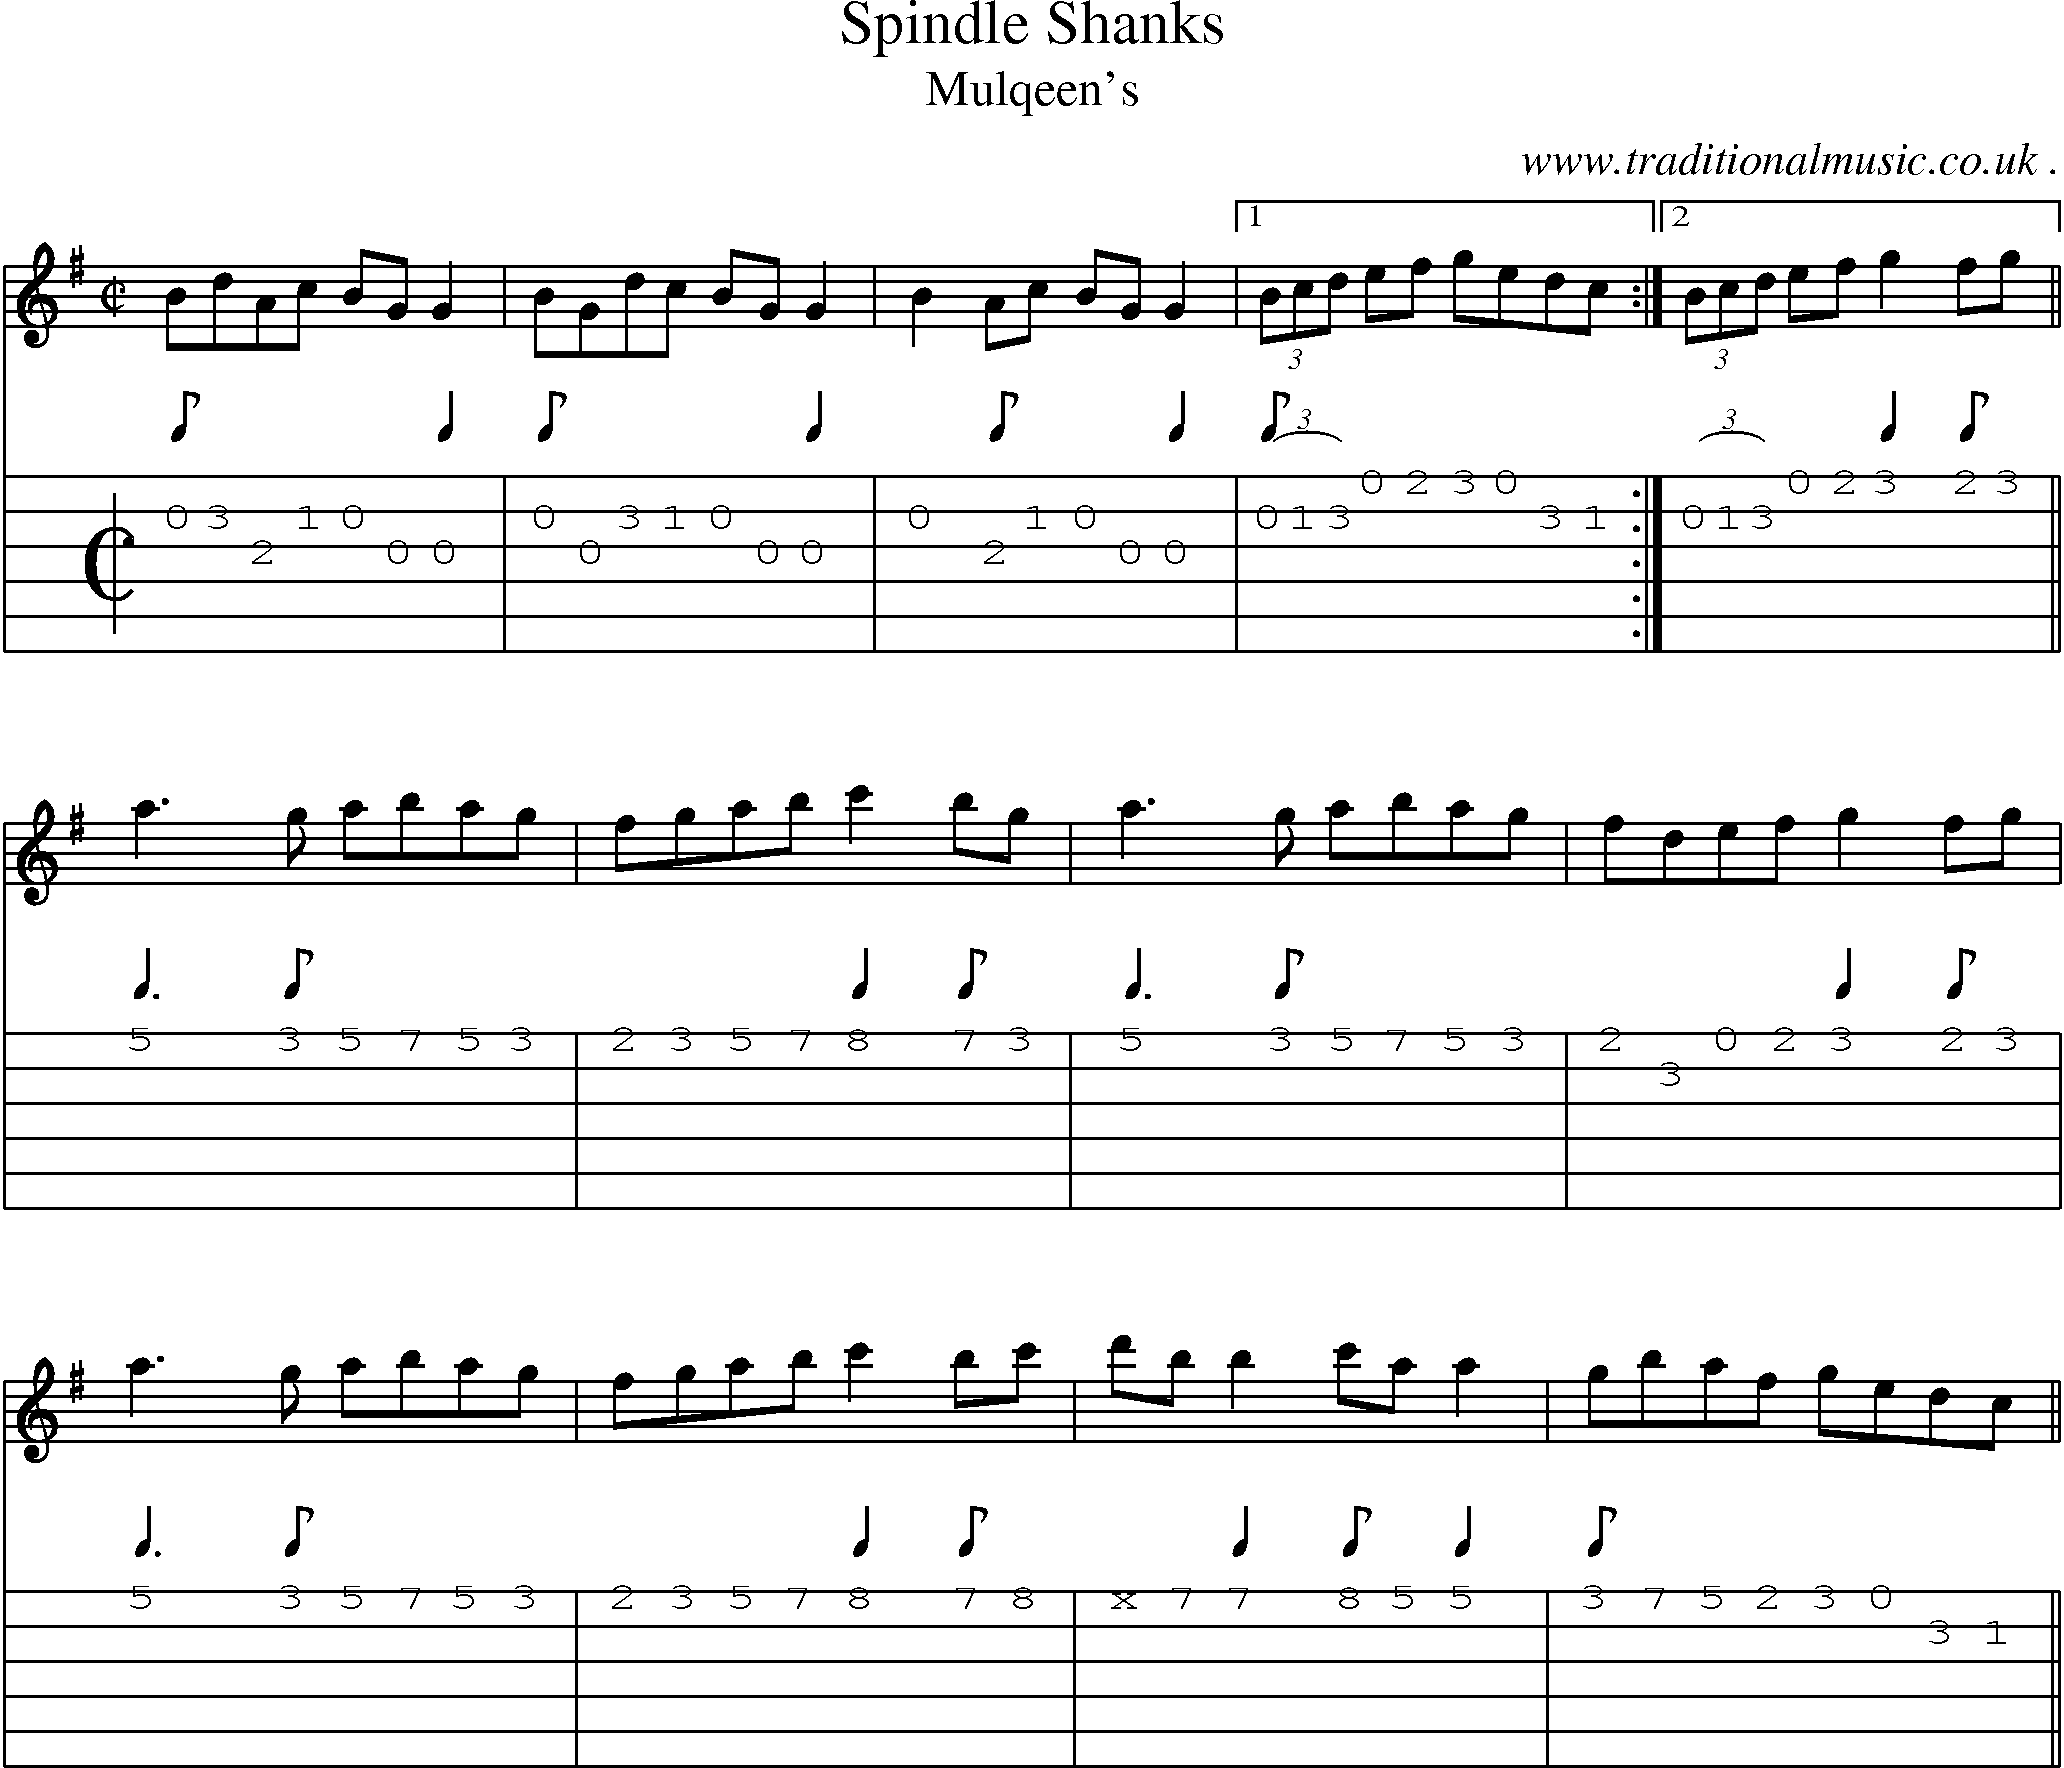 Sheet-Music and Guitar Tabs for Spindle Shanks